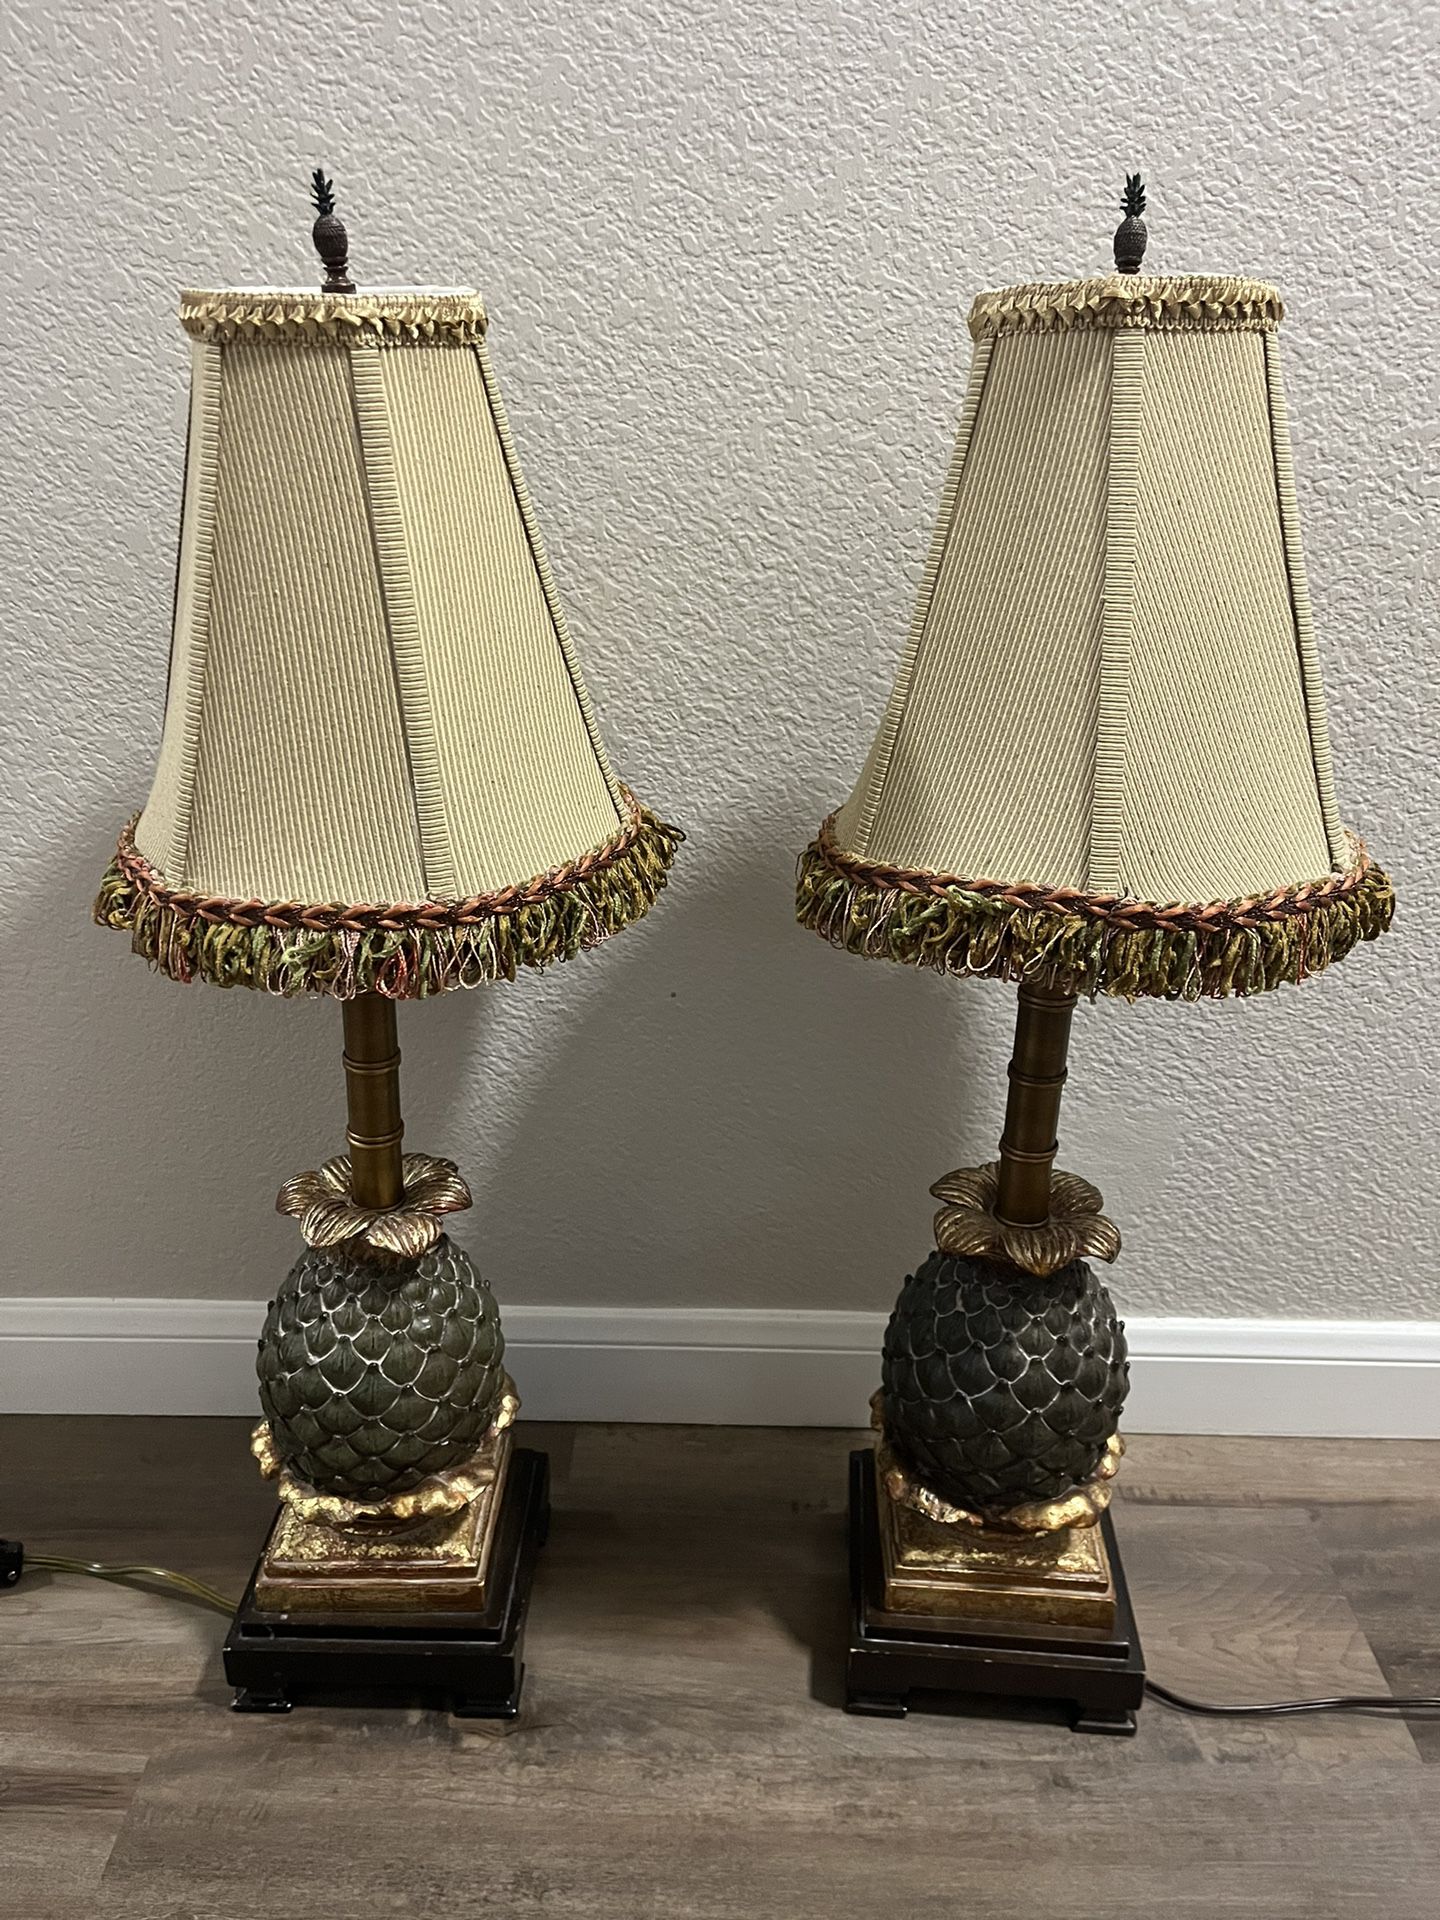 2 Antique Pineapple Lamps